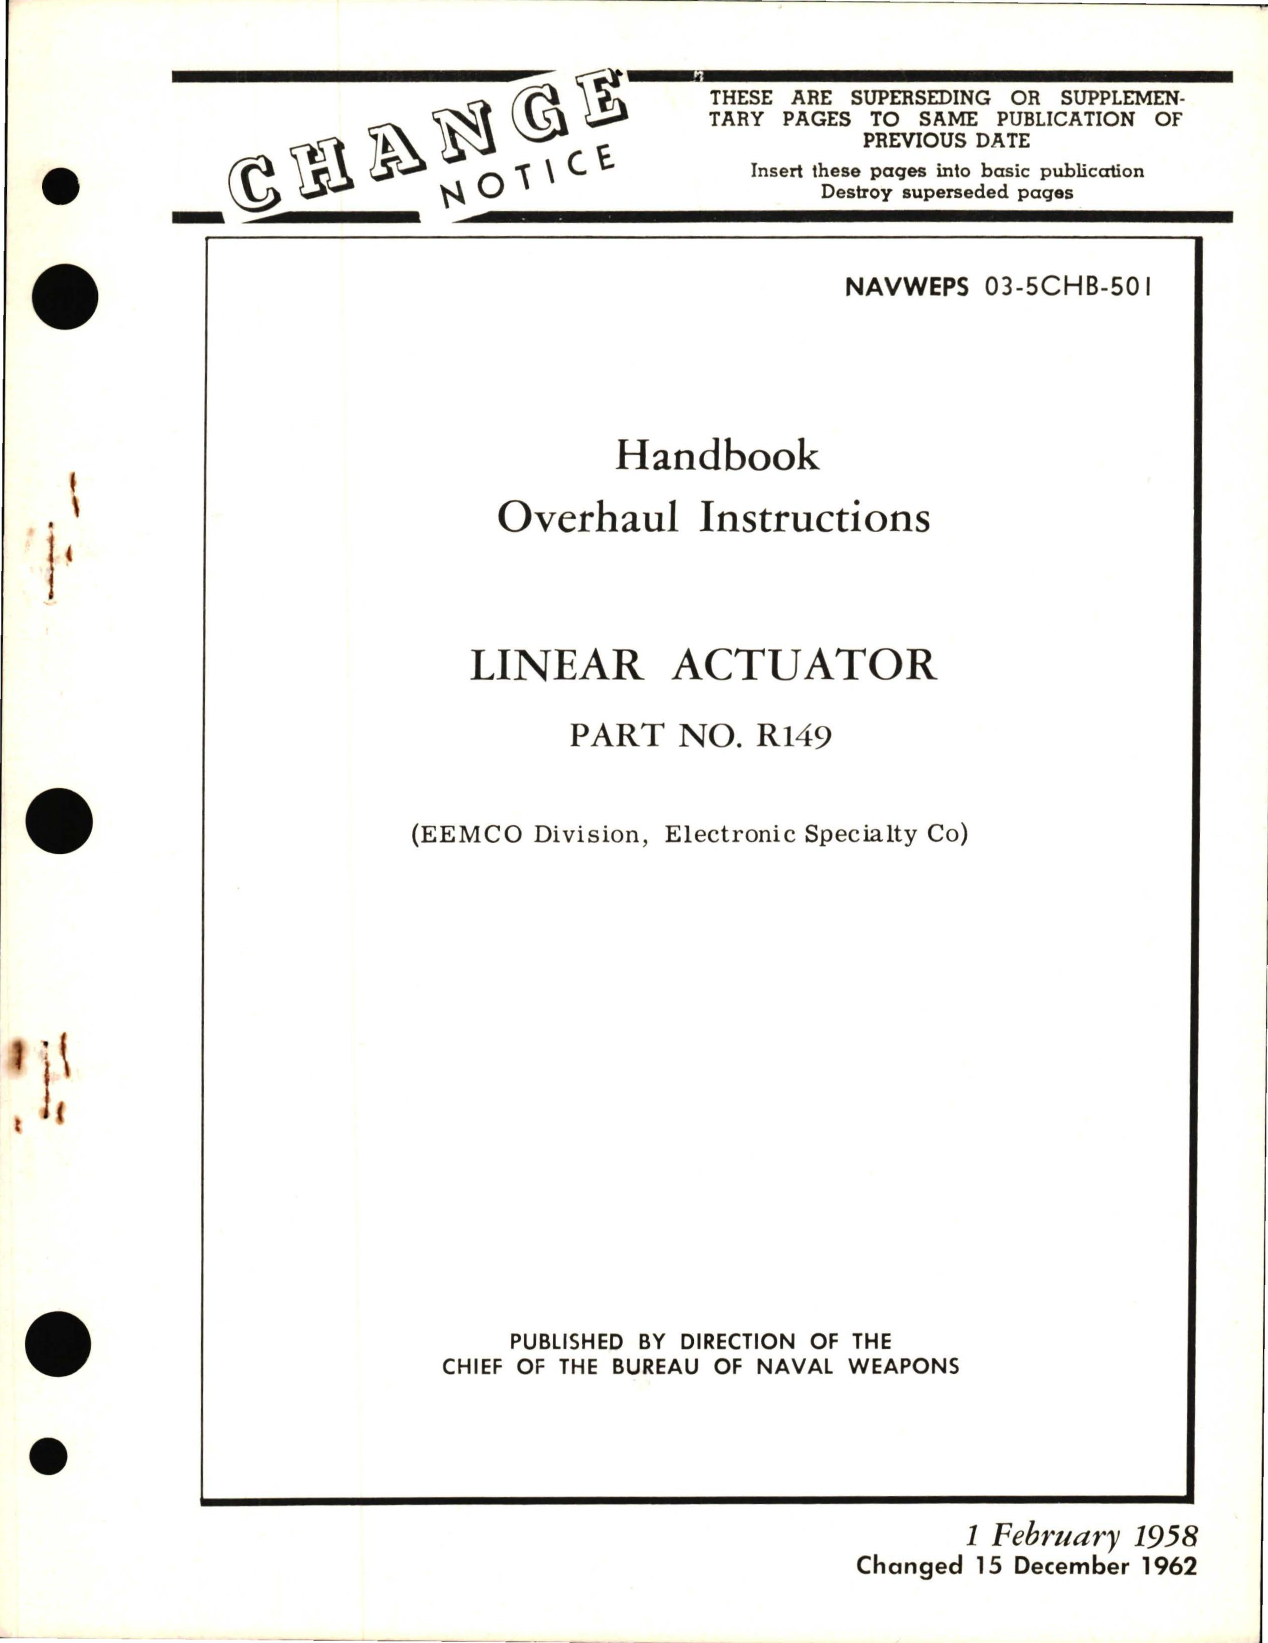 Sample page 1 from AirCorps Library document: Overhaul Instructions for Linear Actuator - Part R149